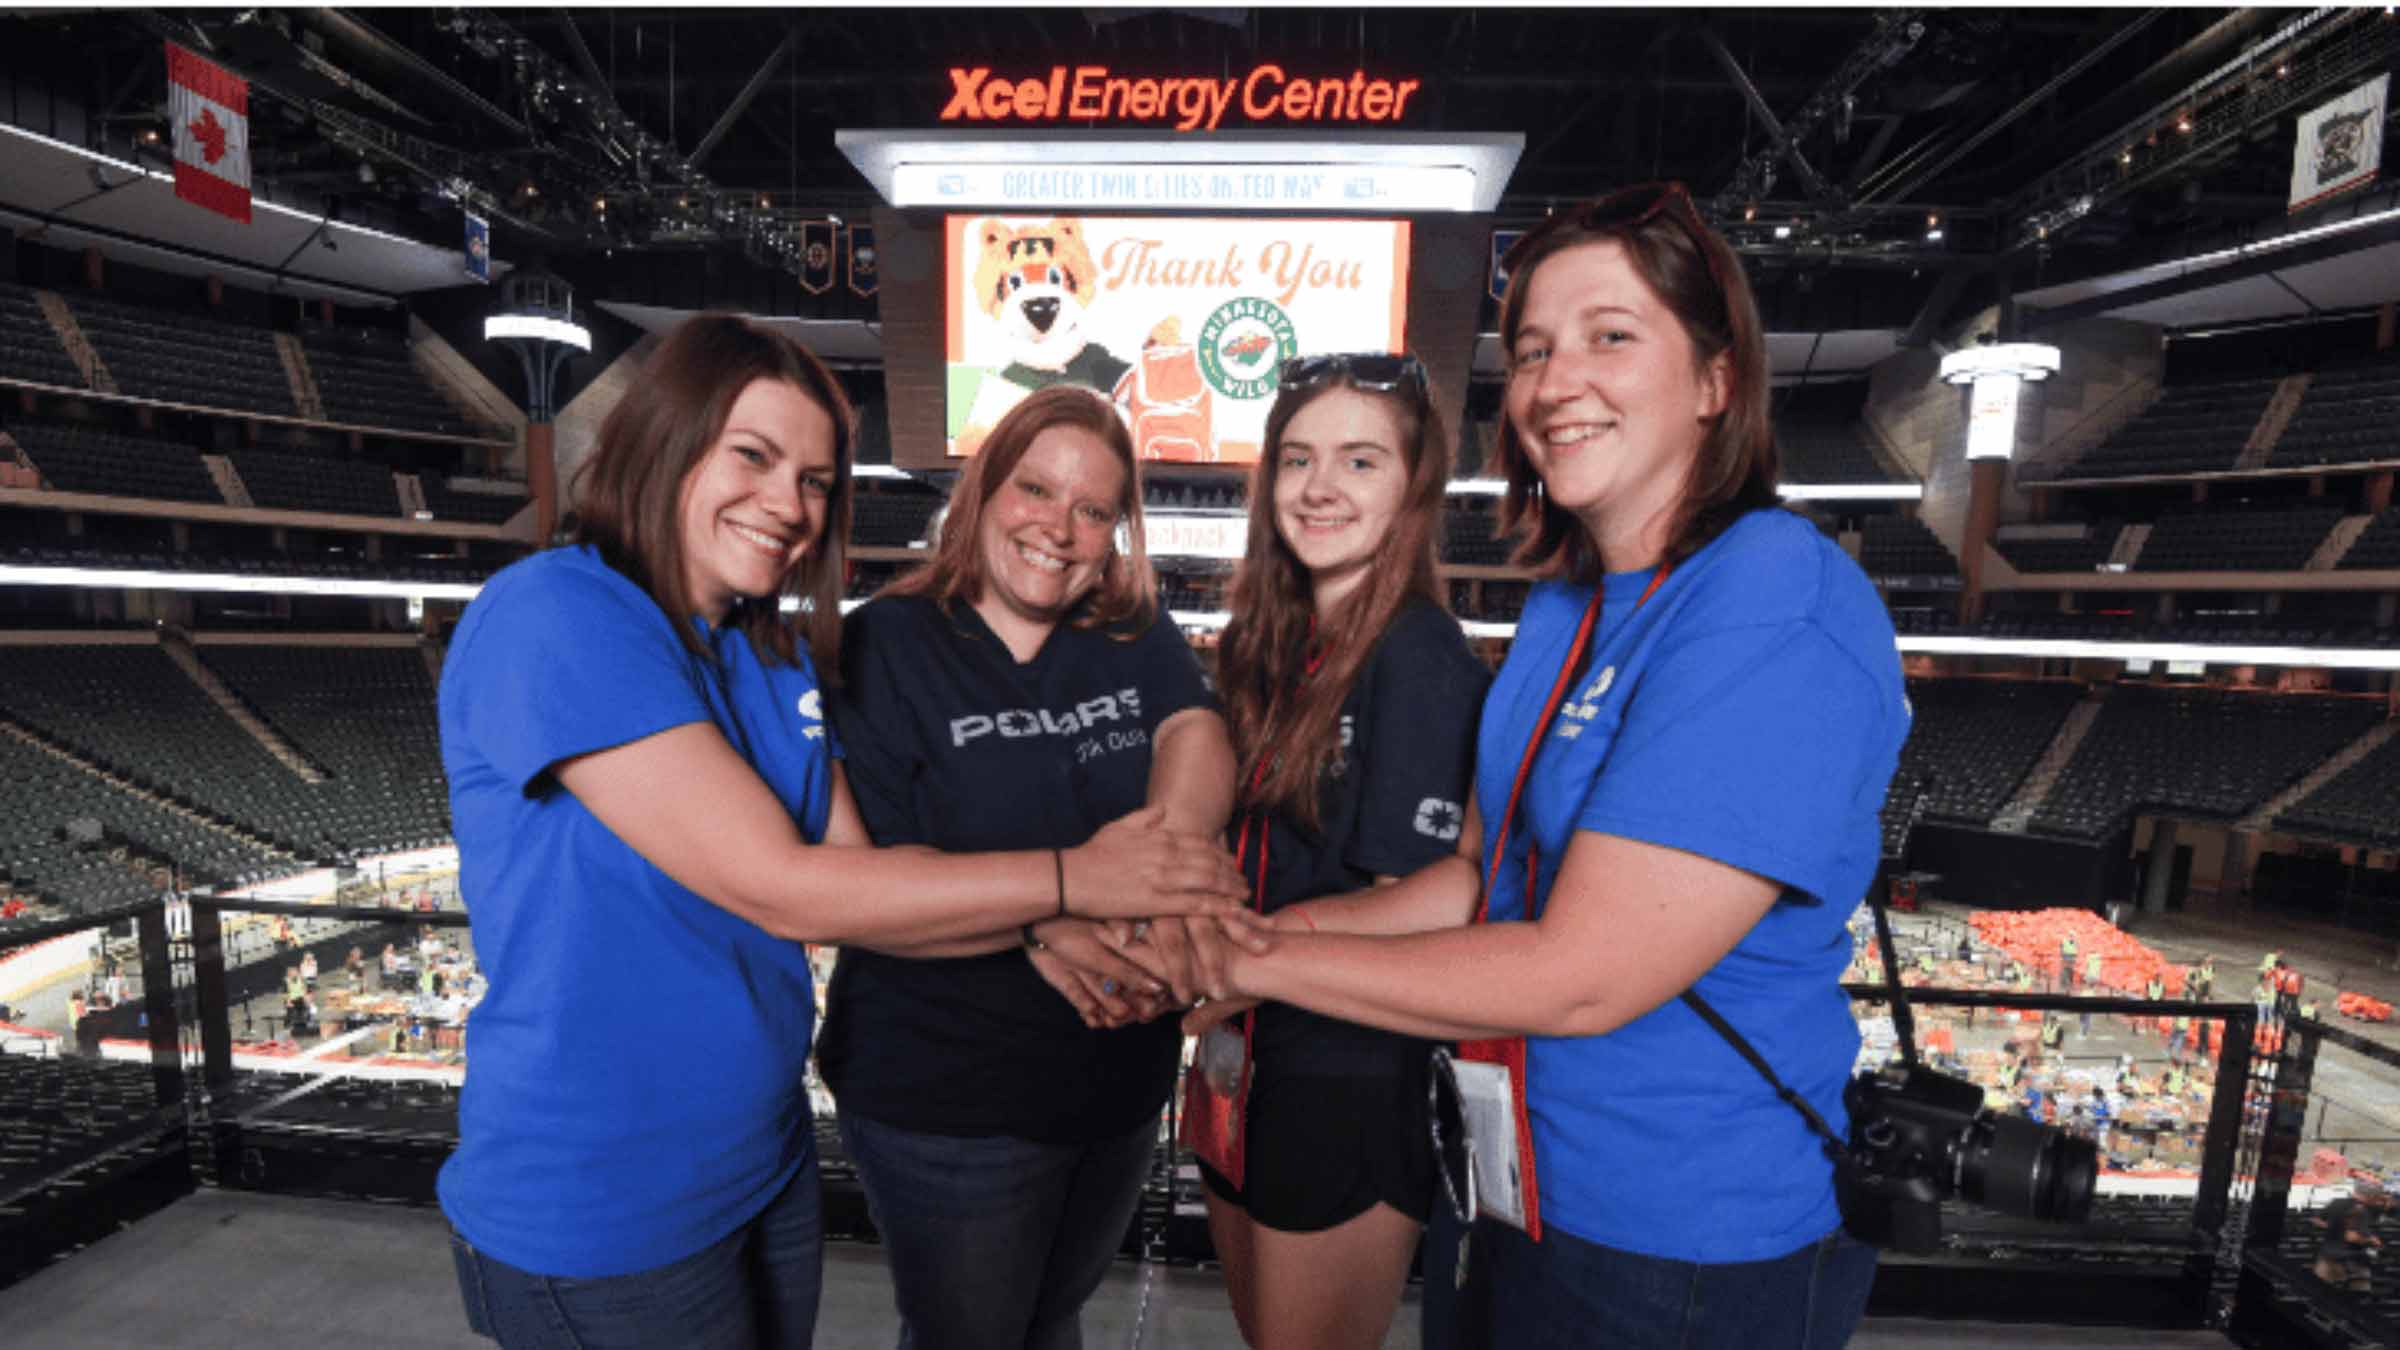 A group of volunteers stands together in front of the Xcel Energy Center